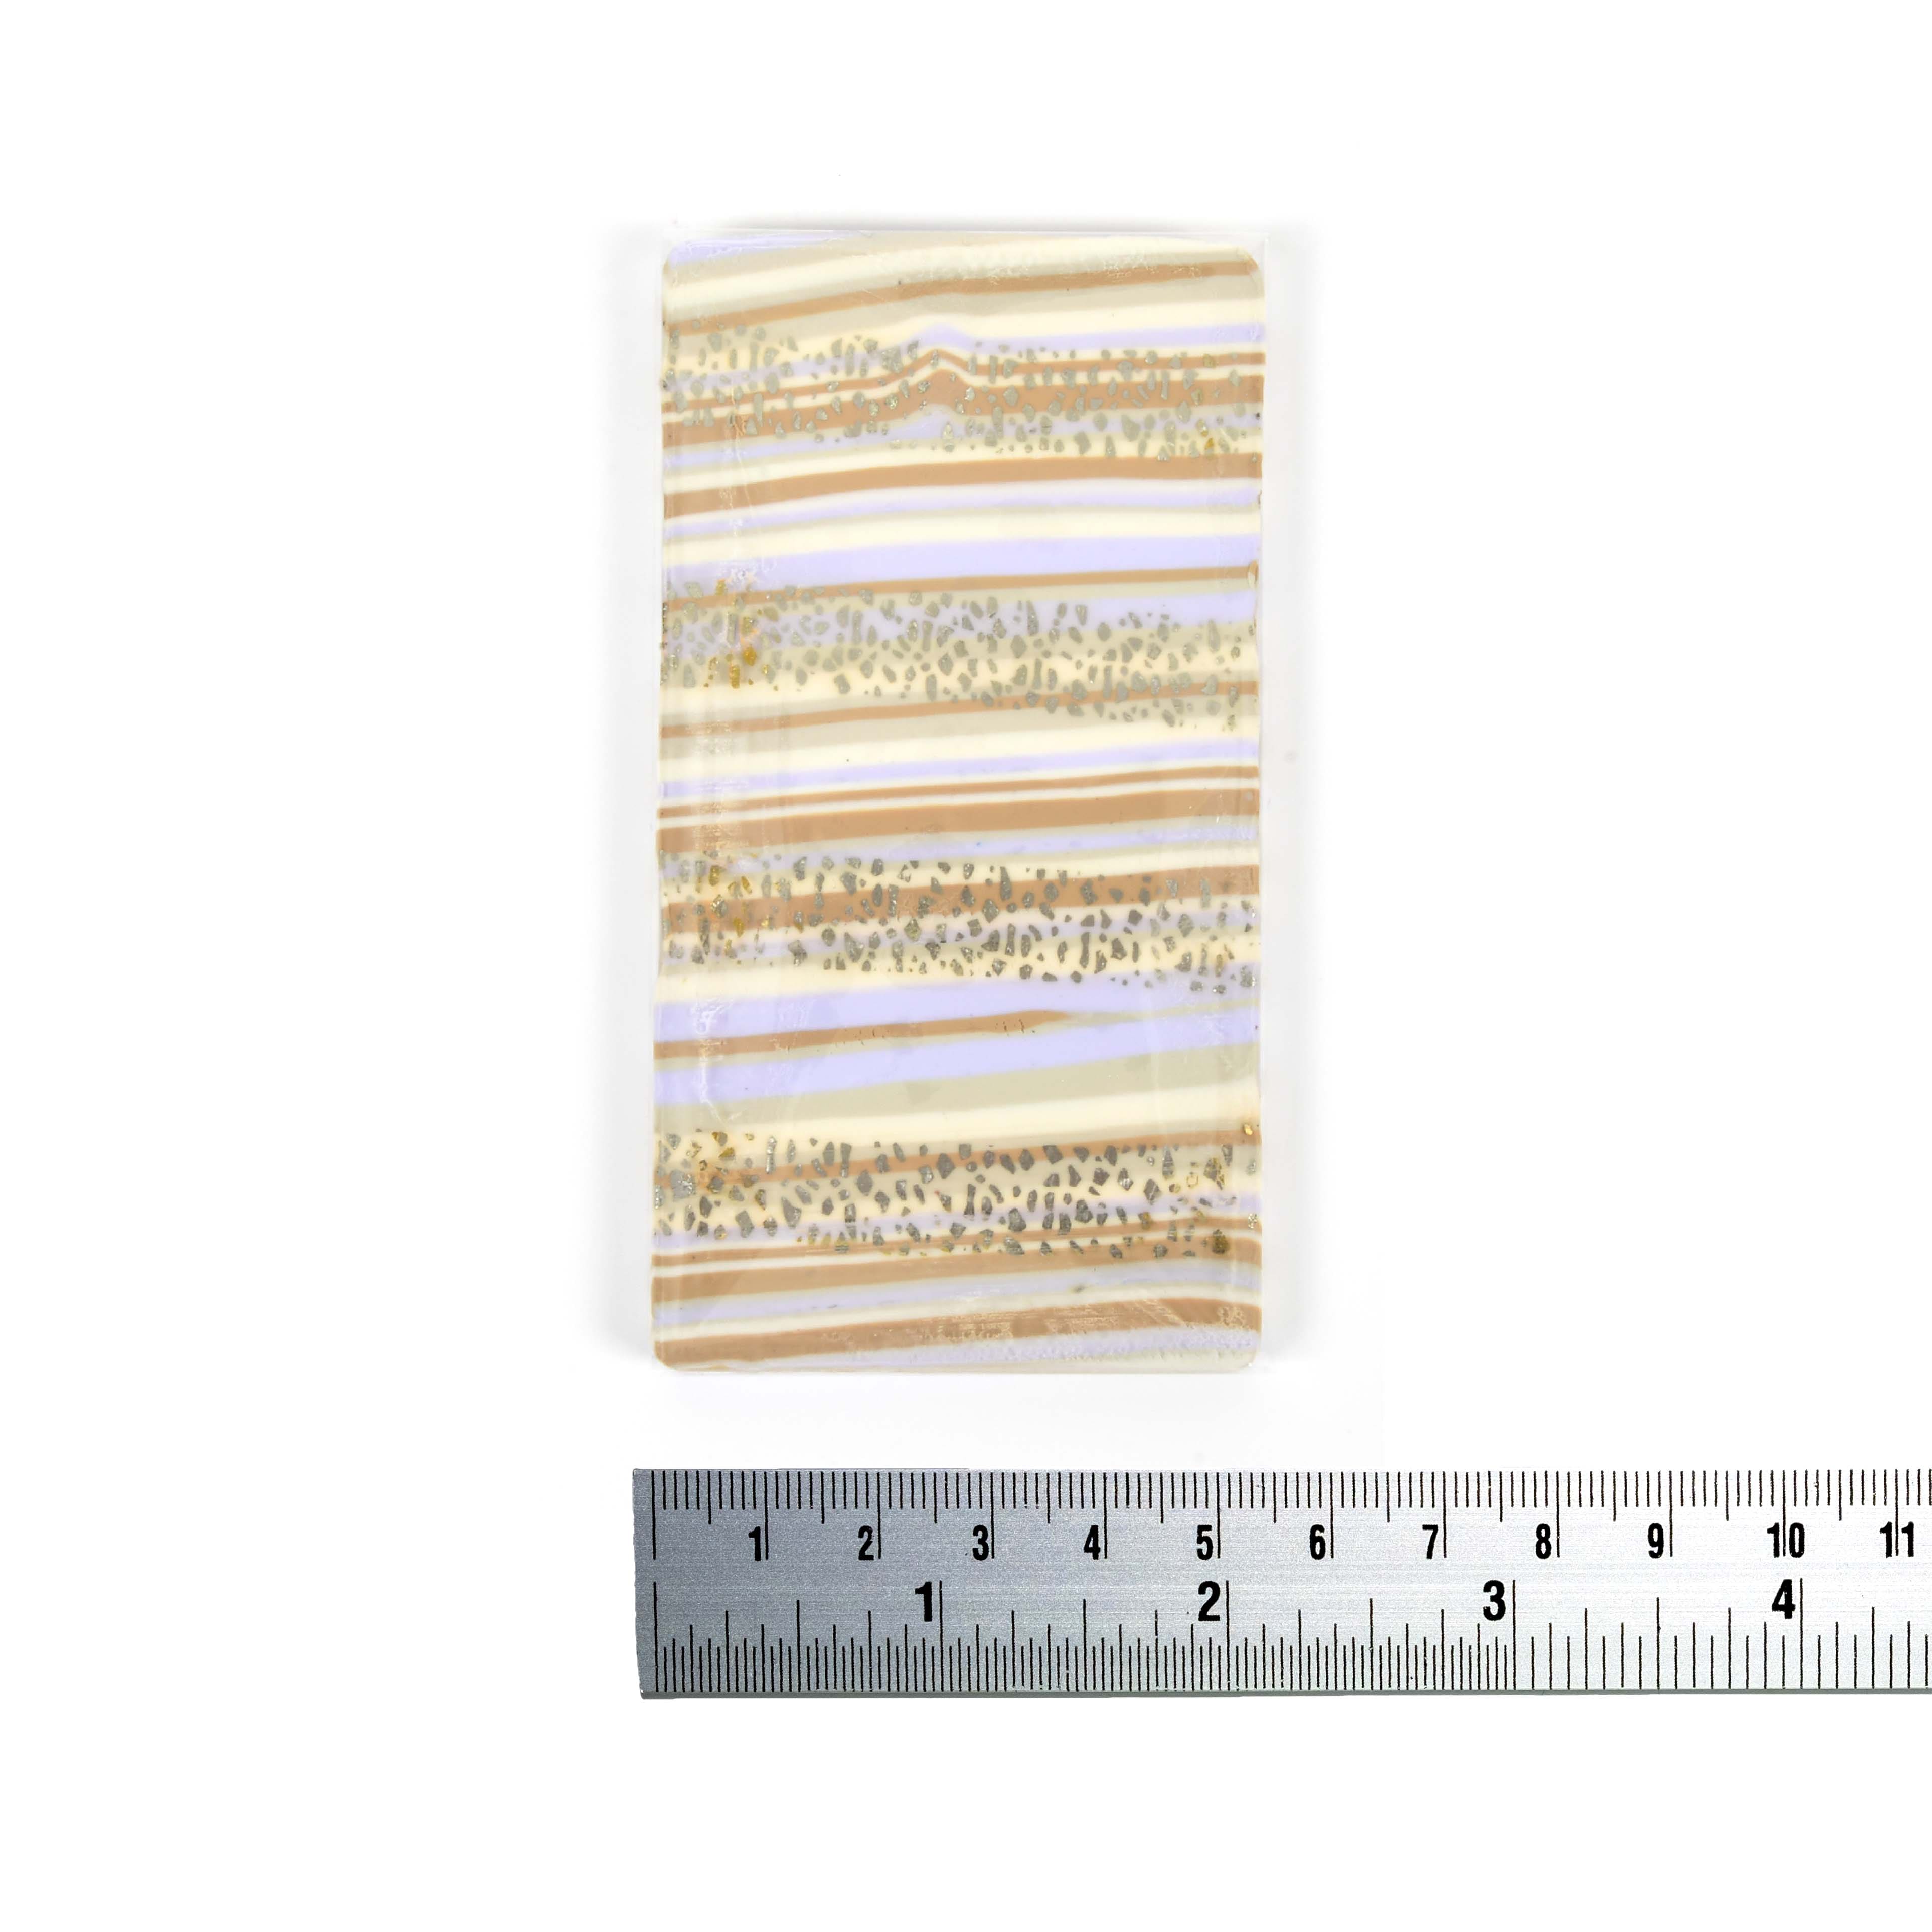 Lavender Stripes Gold Foil Oven Bake Polymer Clay by Bead Landing&#x2122;